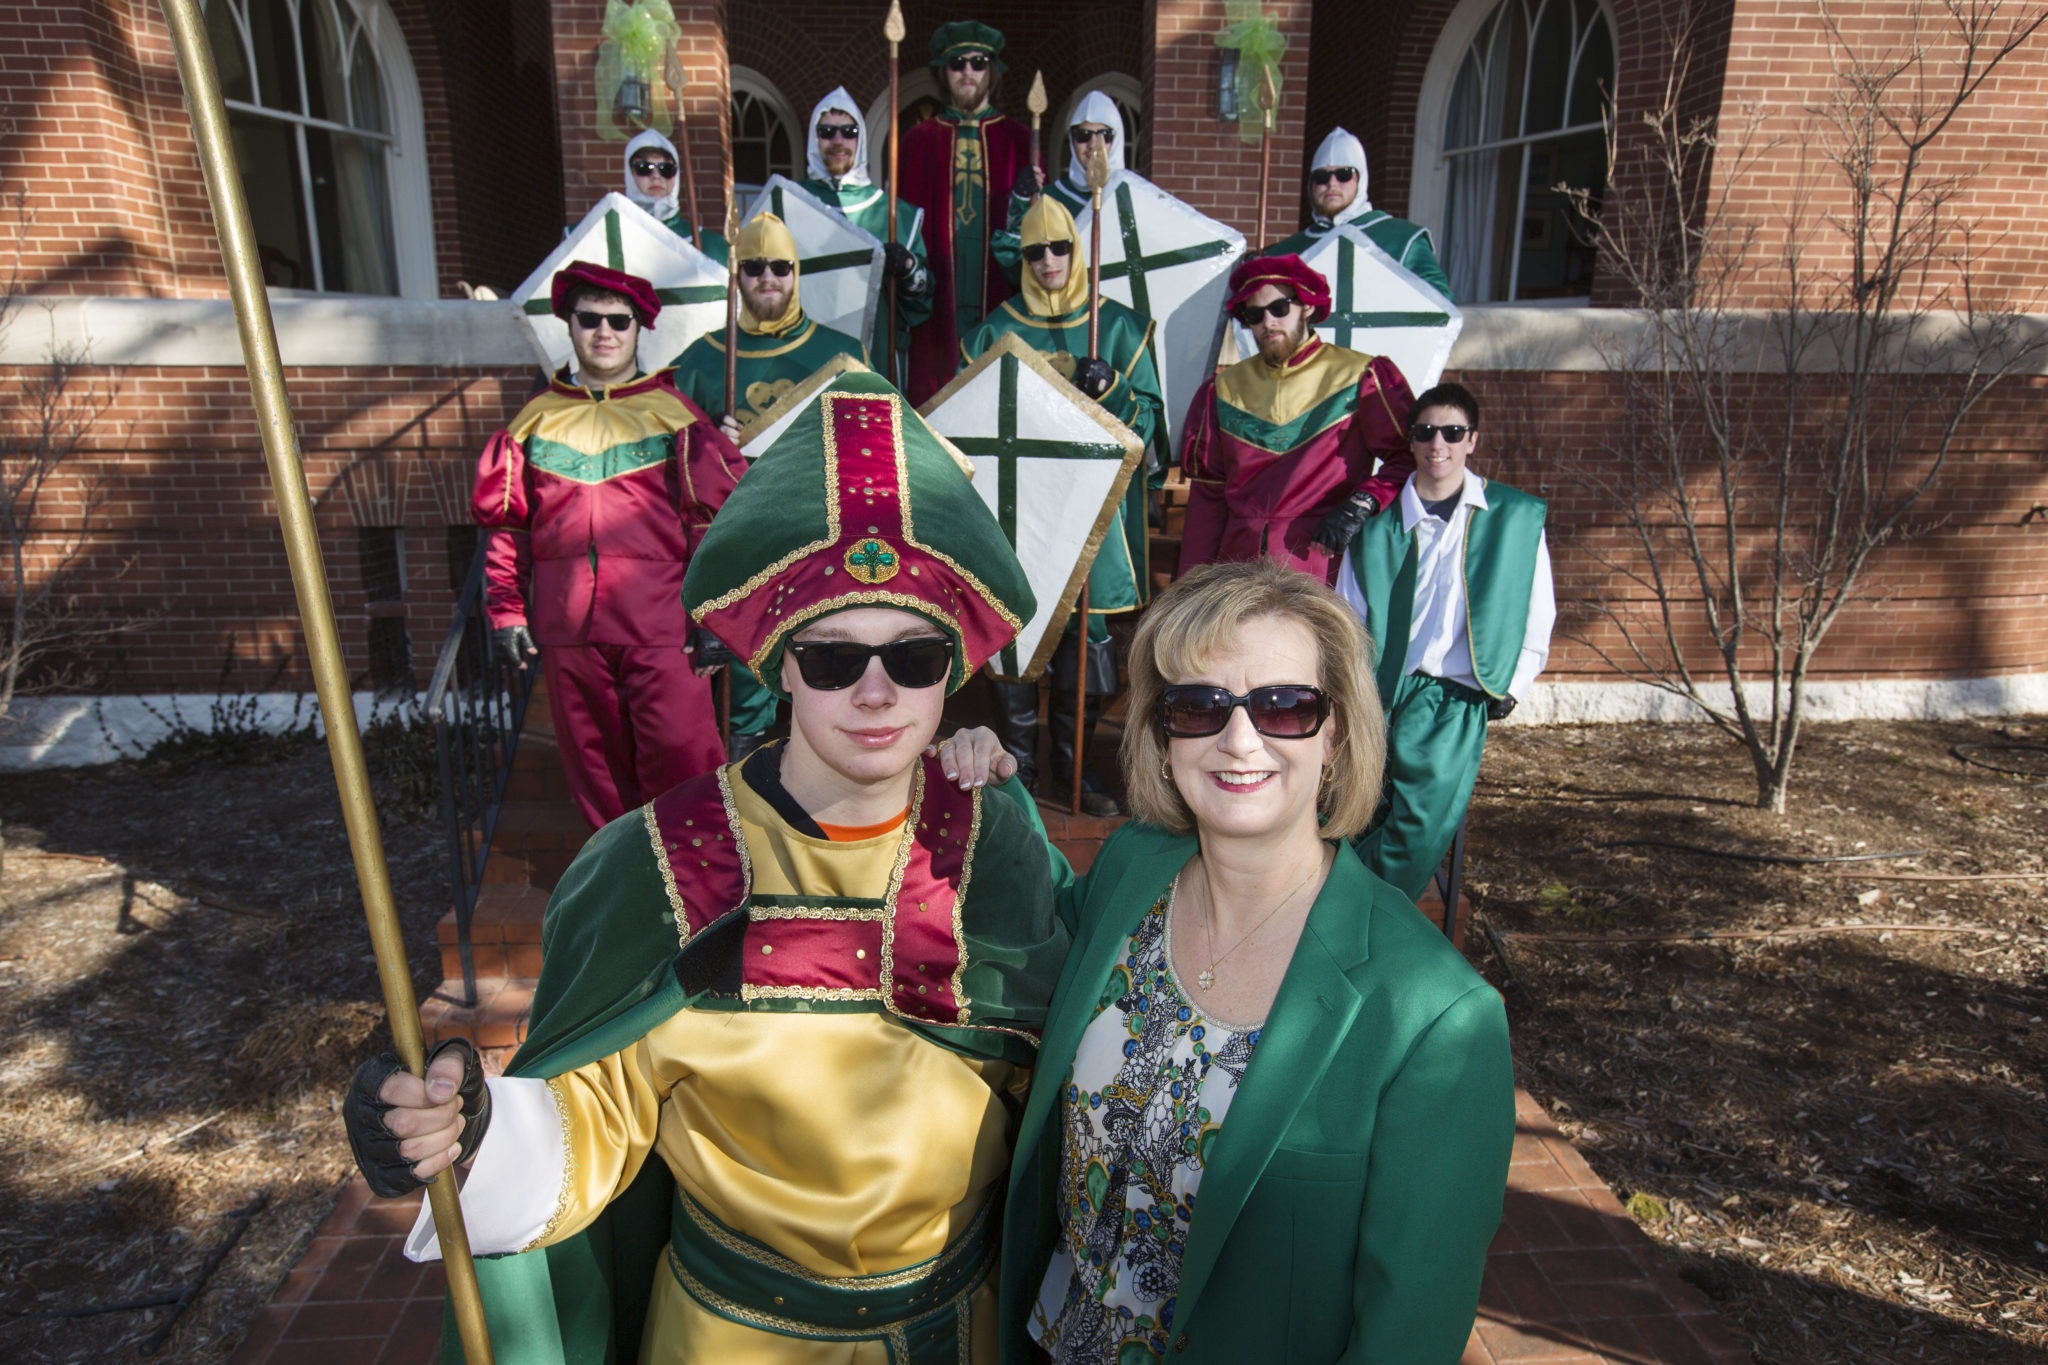 Missouri S T News and Events Missouri S T selects 2014 St Pat